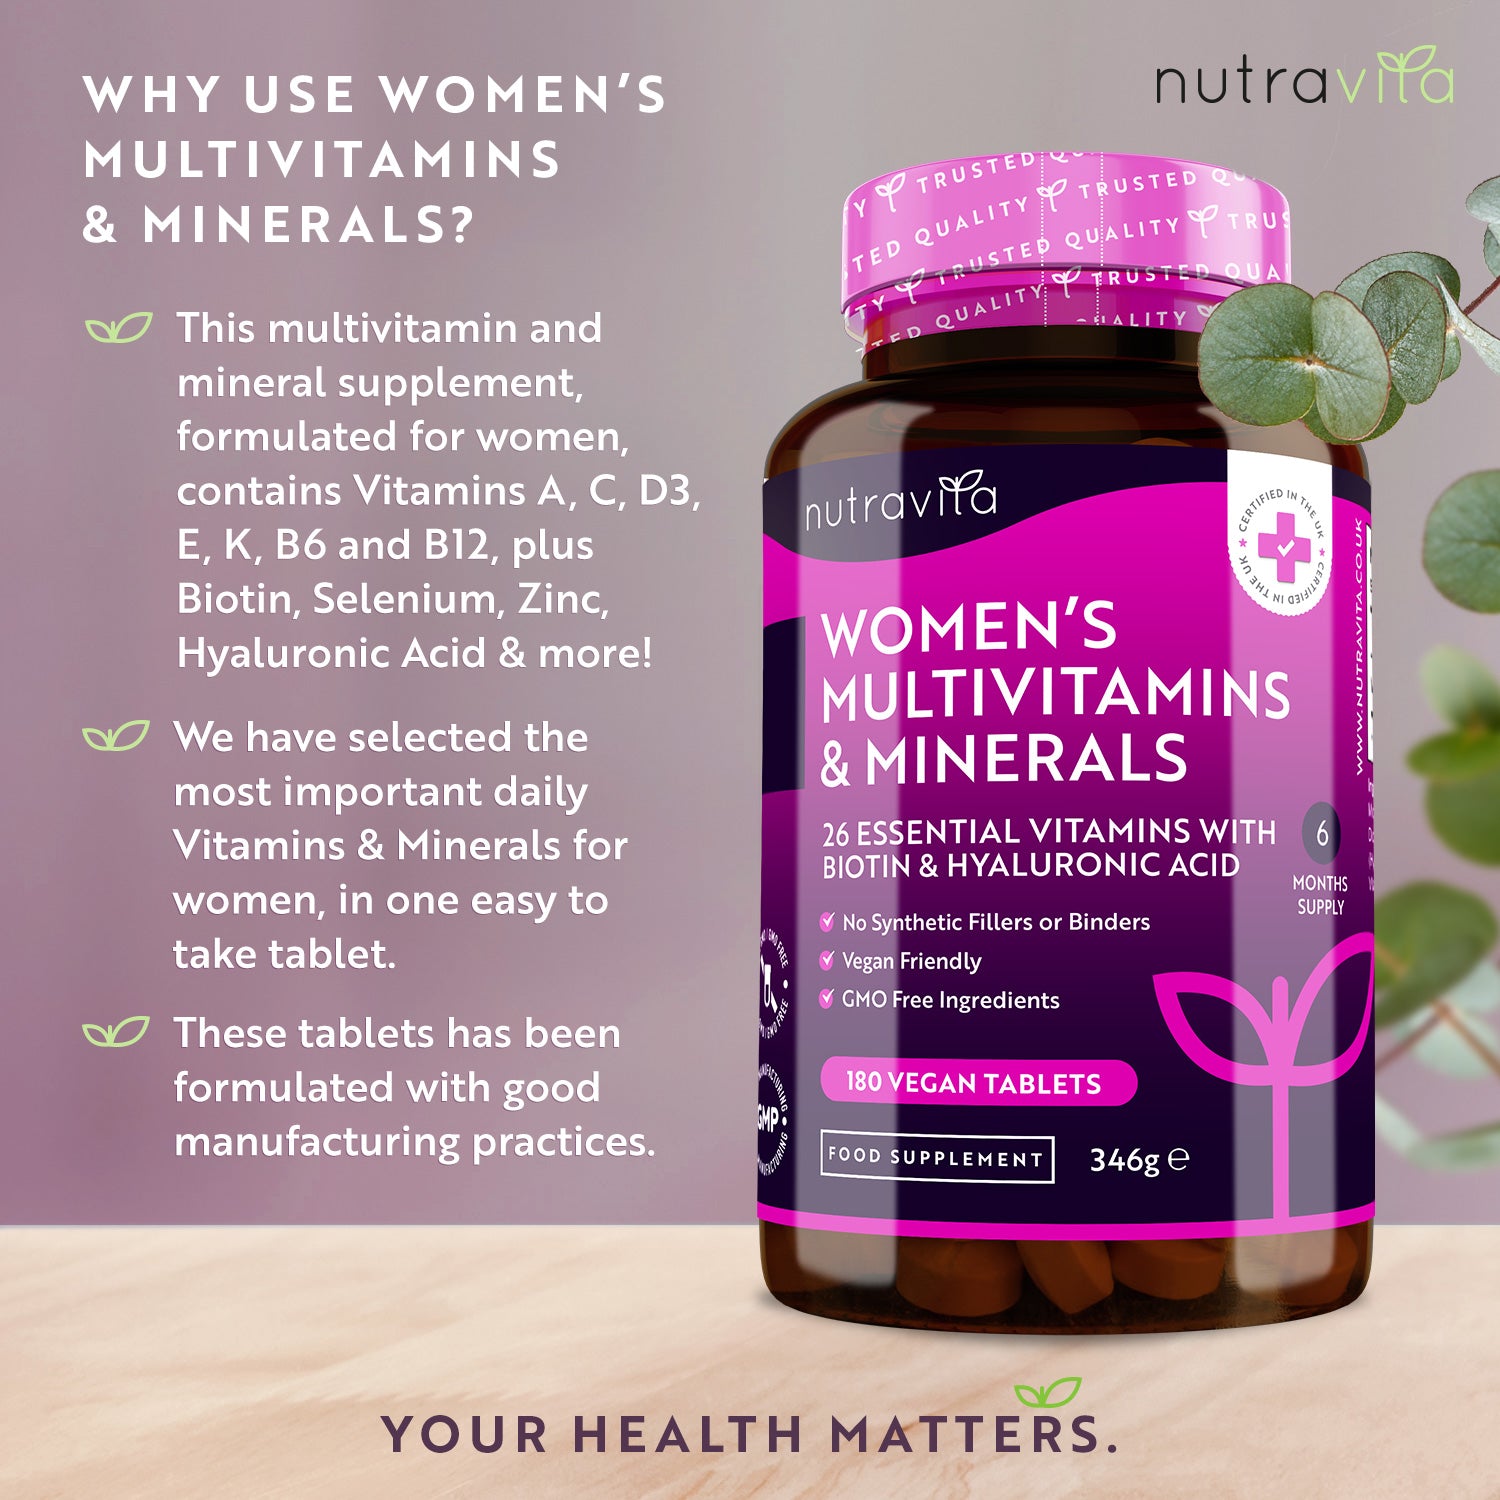 Women's Multivitamins with Biotin and Hyaluronic Acid 180 Vegan Tablets